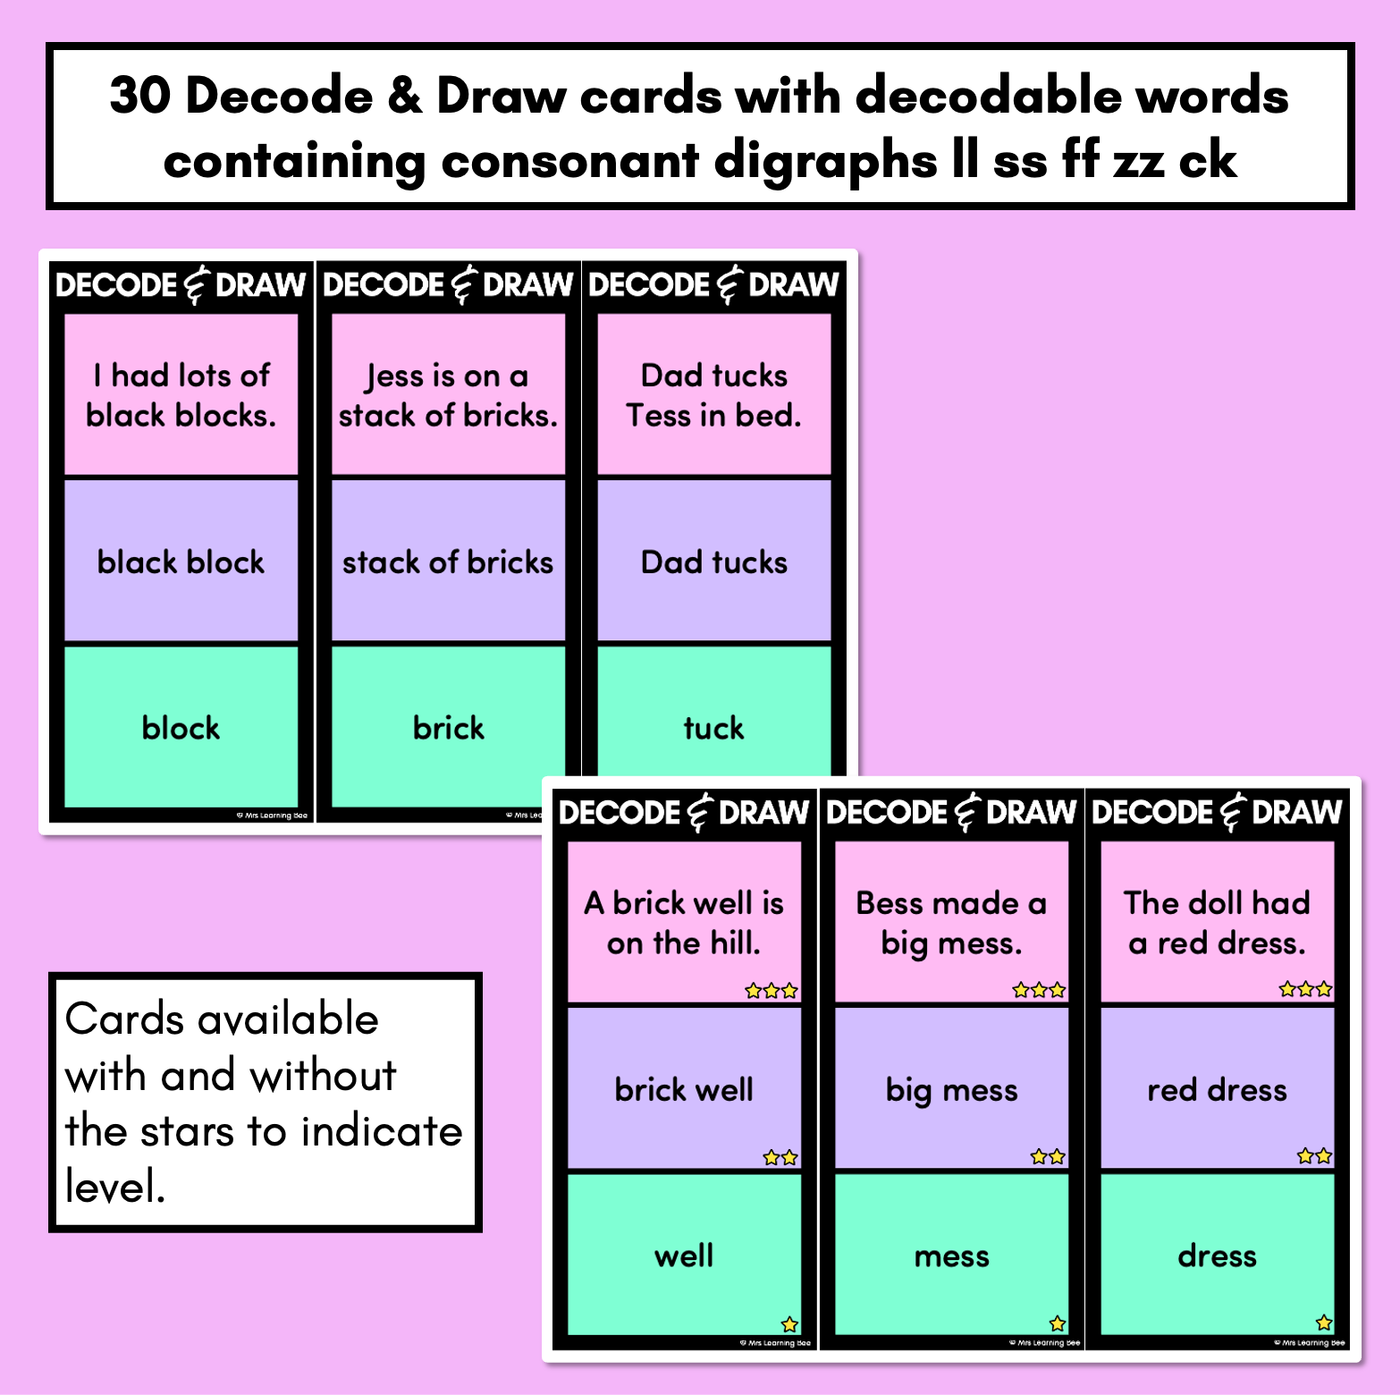 DECODE & DRAW - Consonant Digraphs LL SS FF ZZ CK - Decodable Drawing Phonics Task Cards